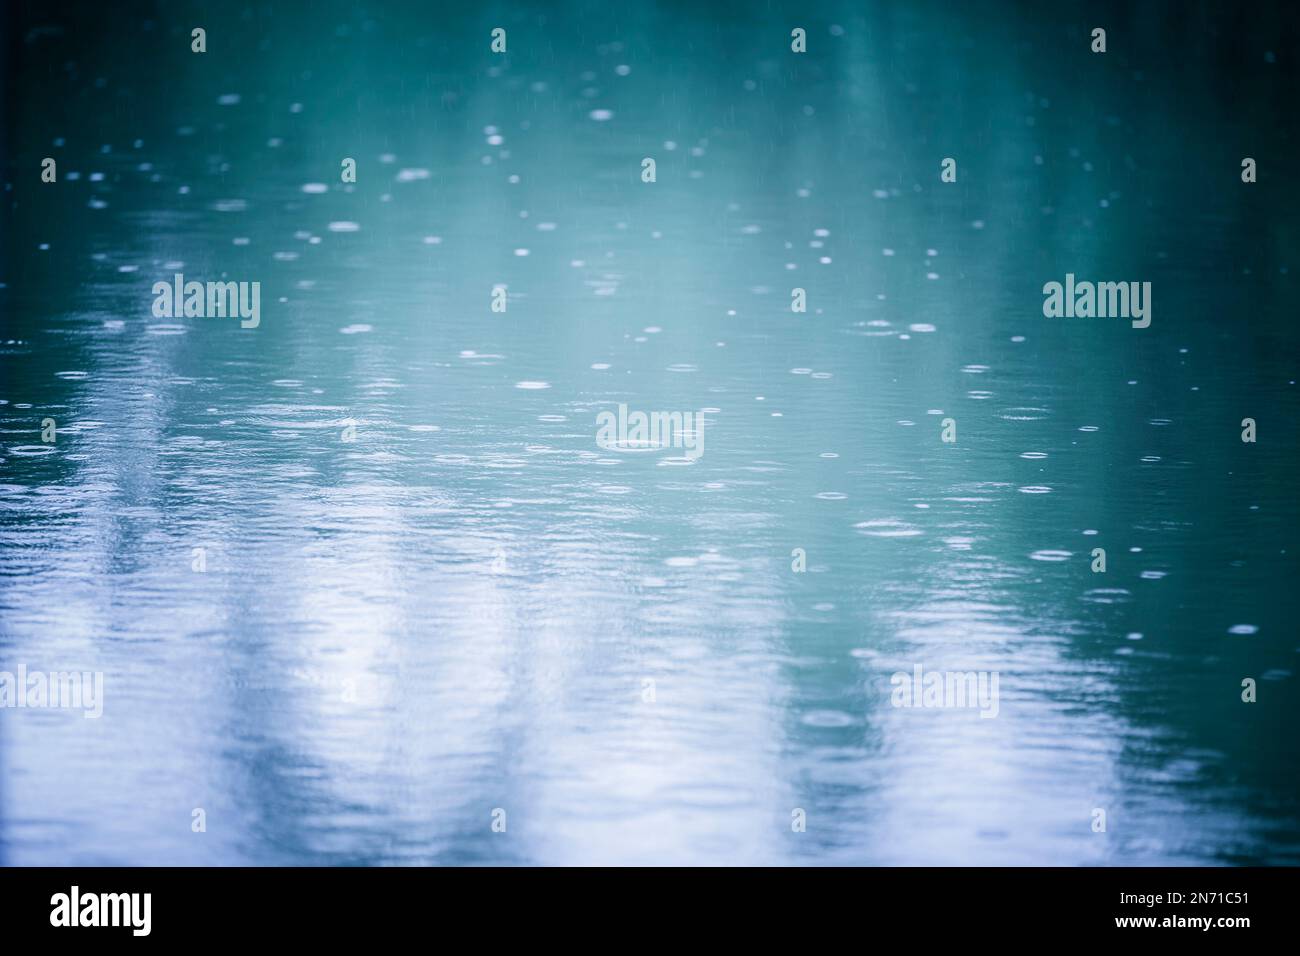 Rain drops in water during rainy weather Stock Photo